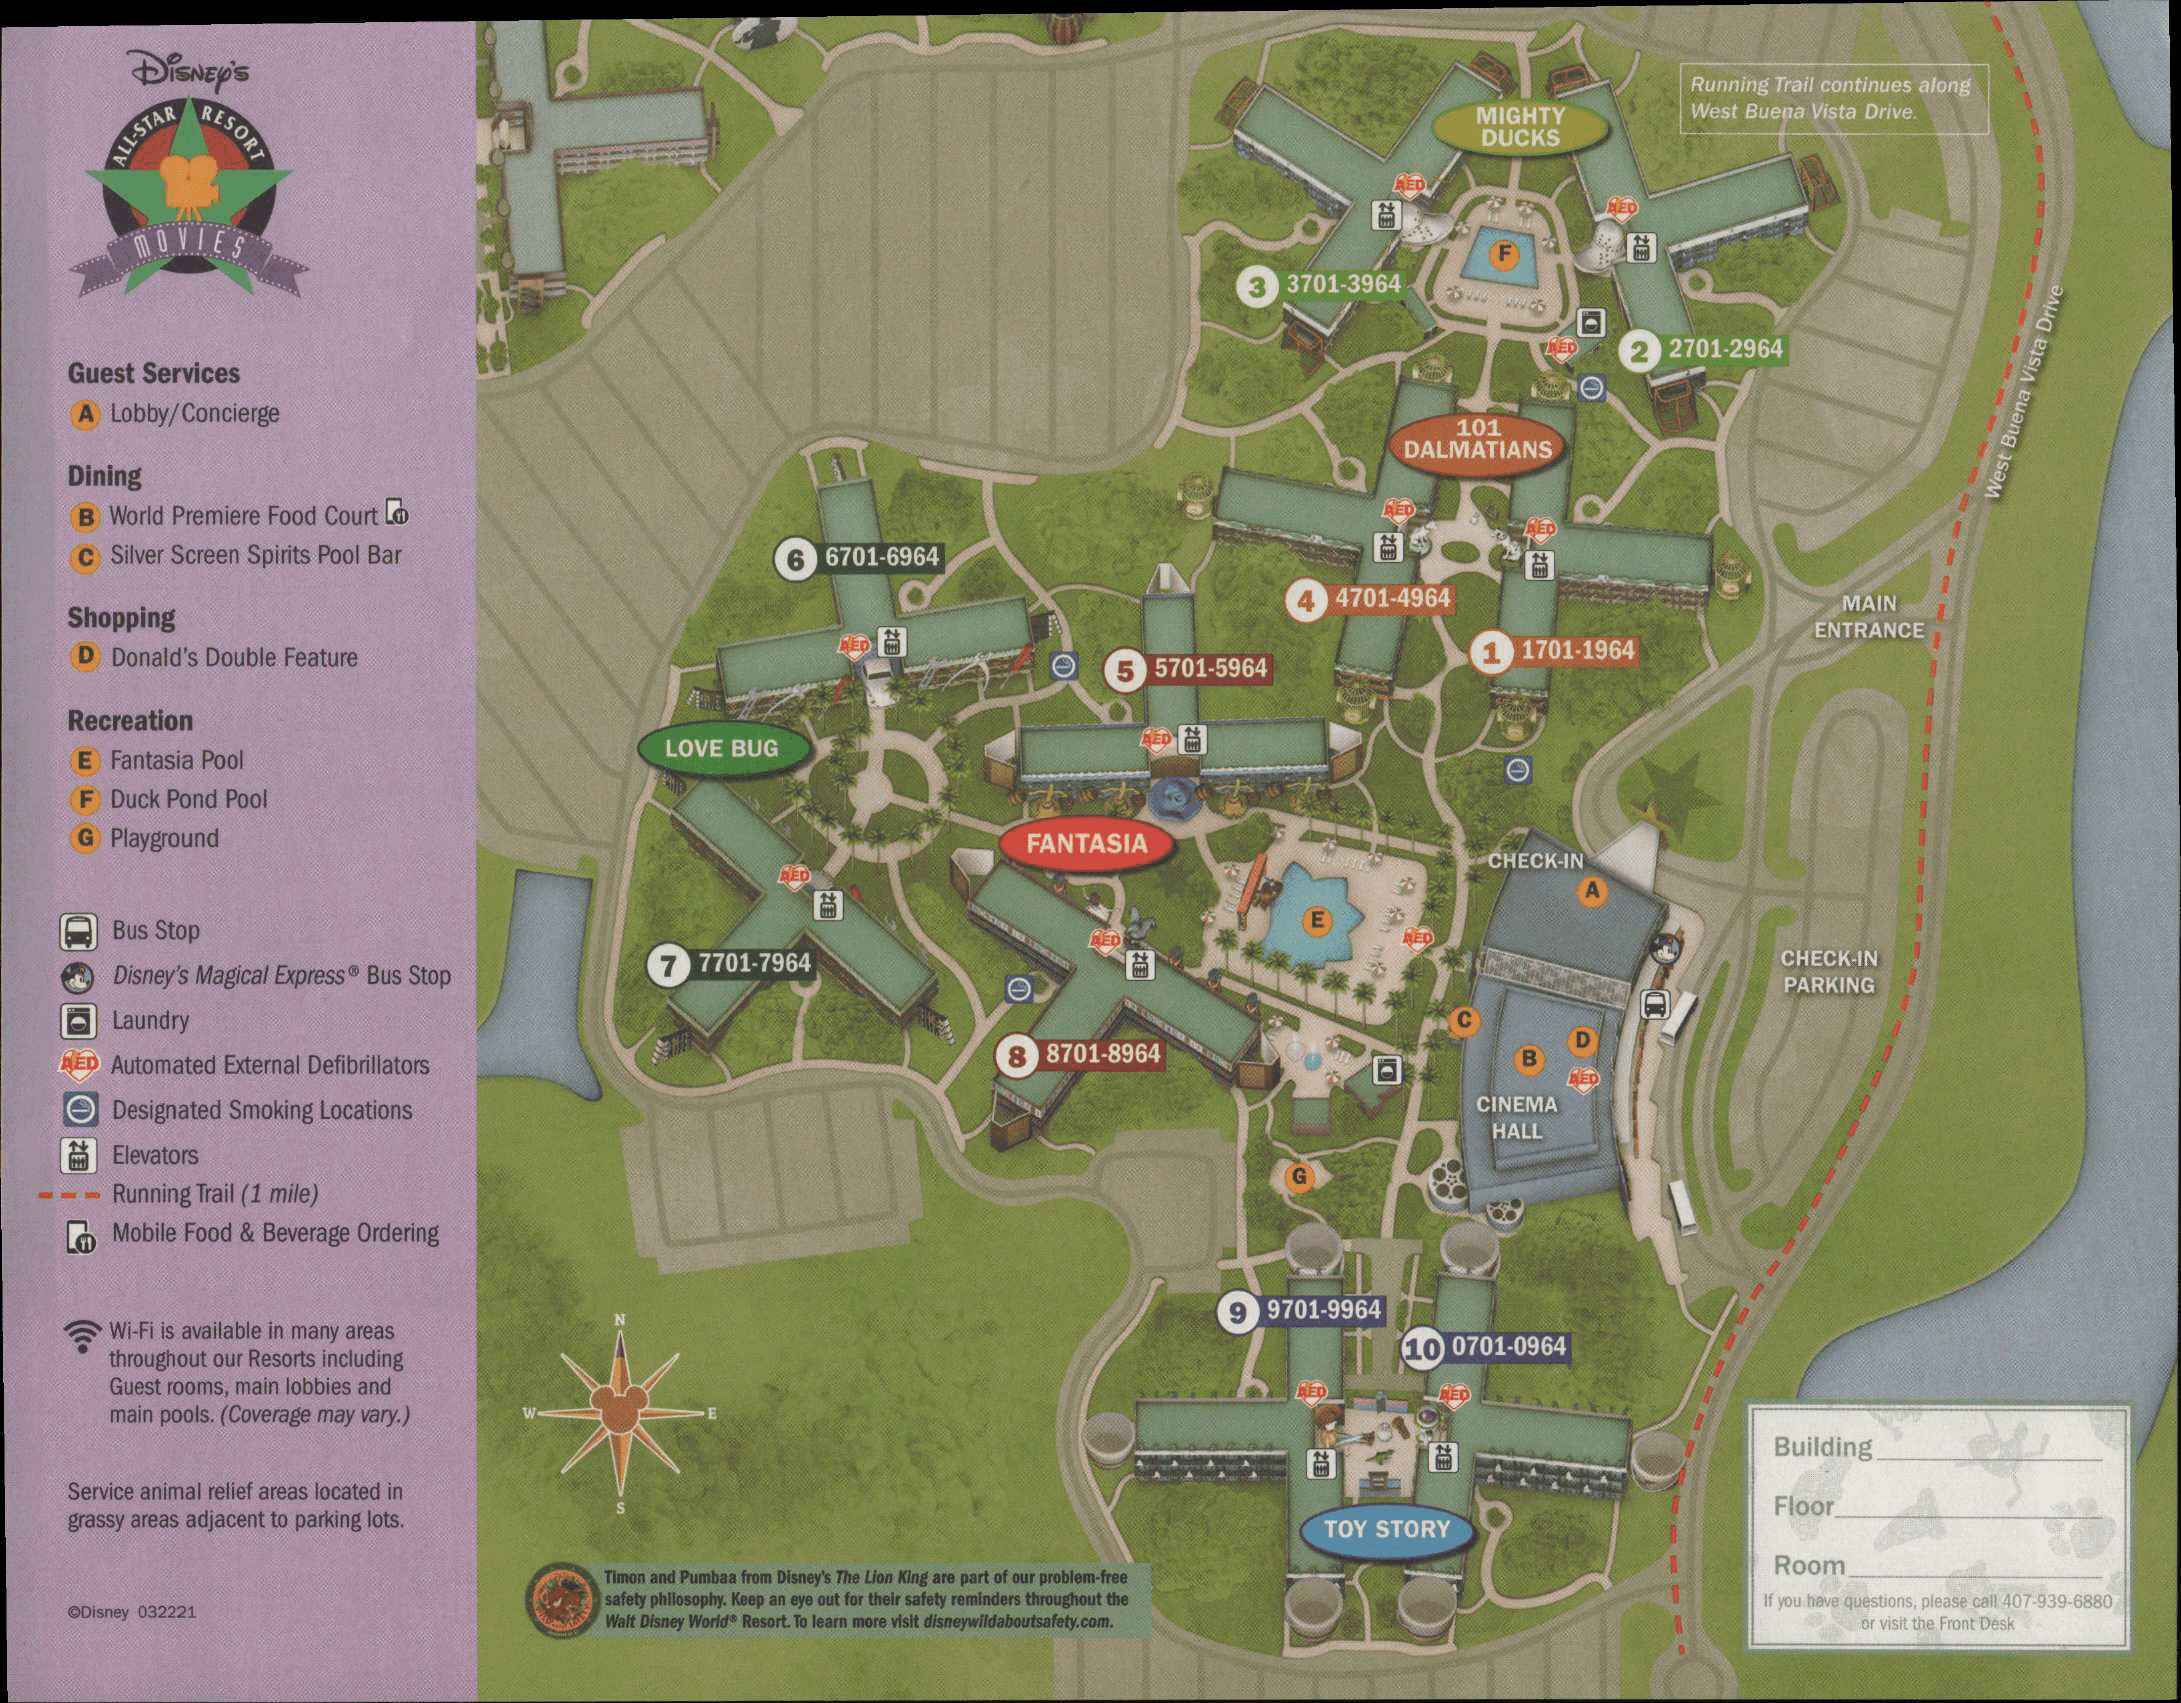 Disney's All-Star Movies Map 